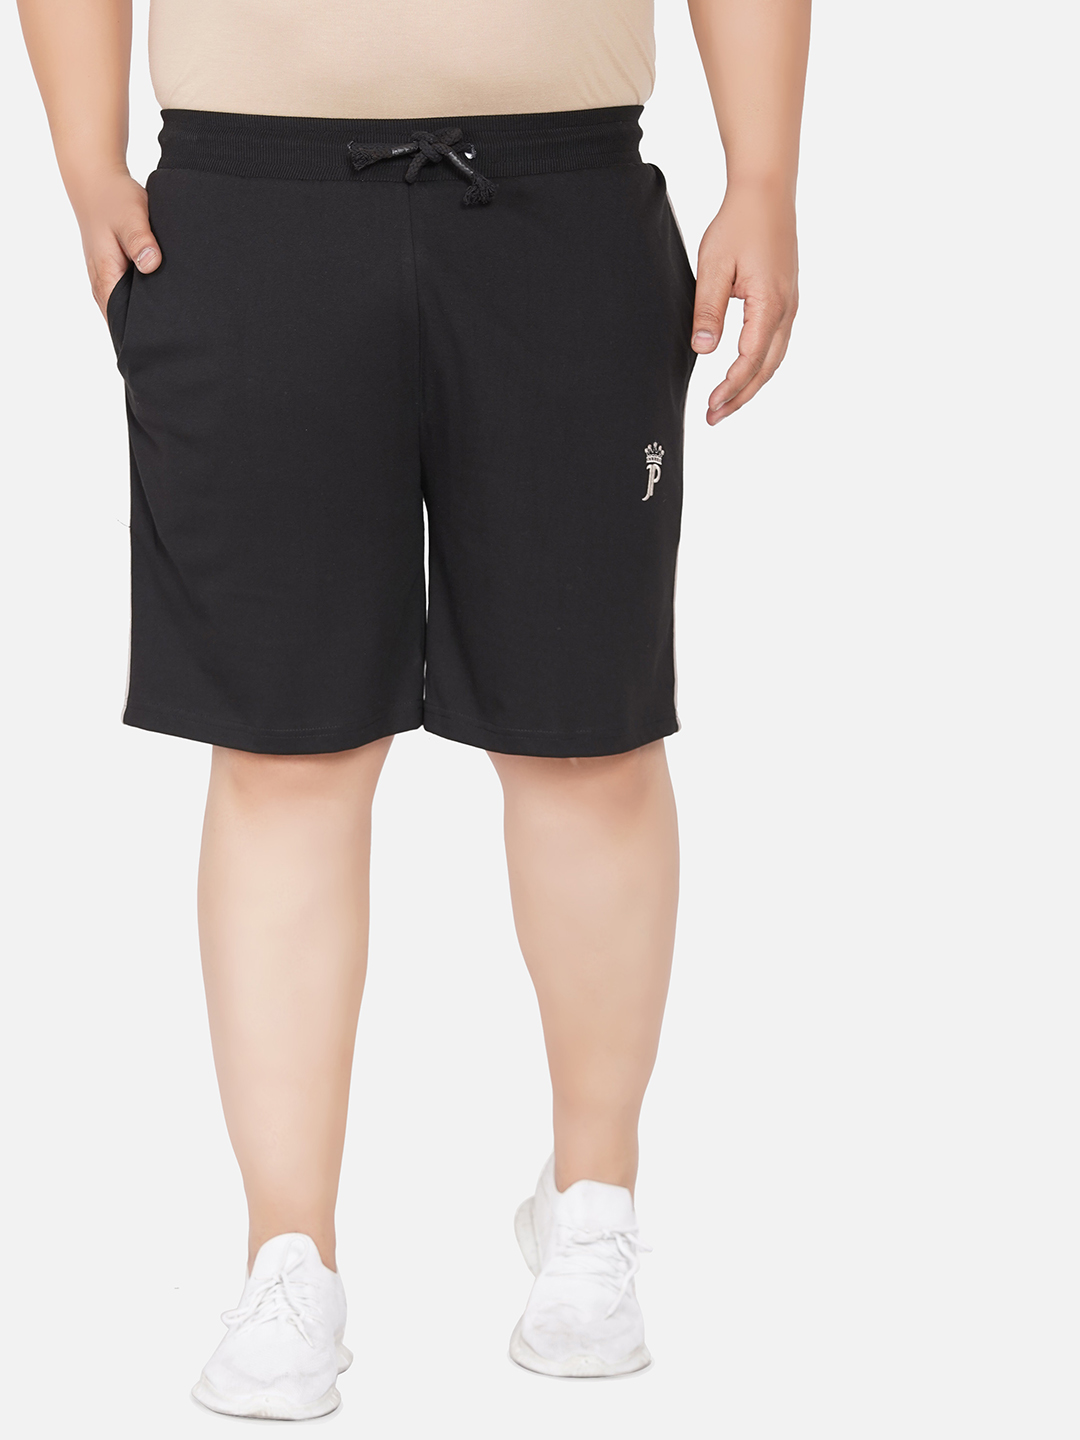 Knight Black Knitted Shorts